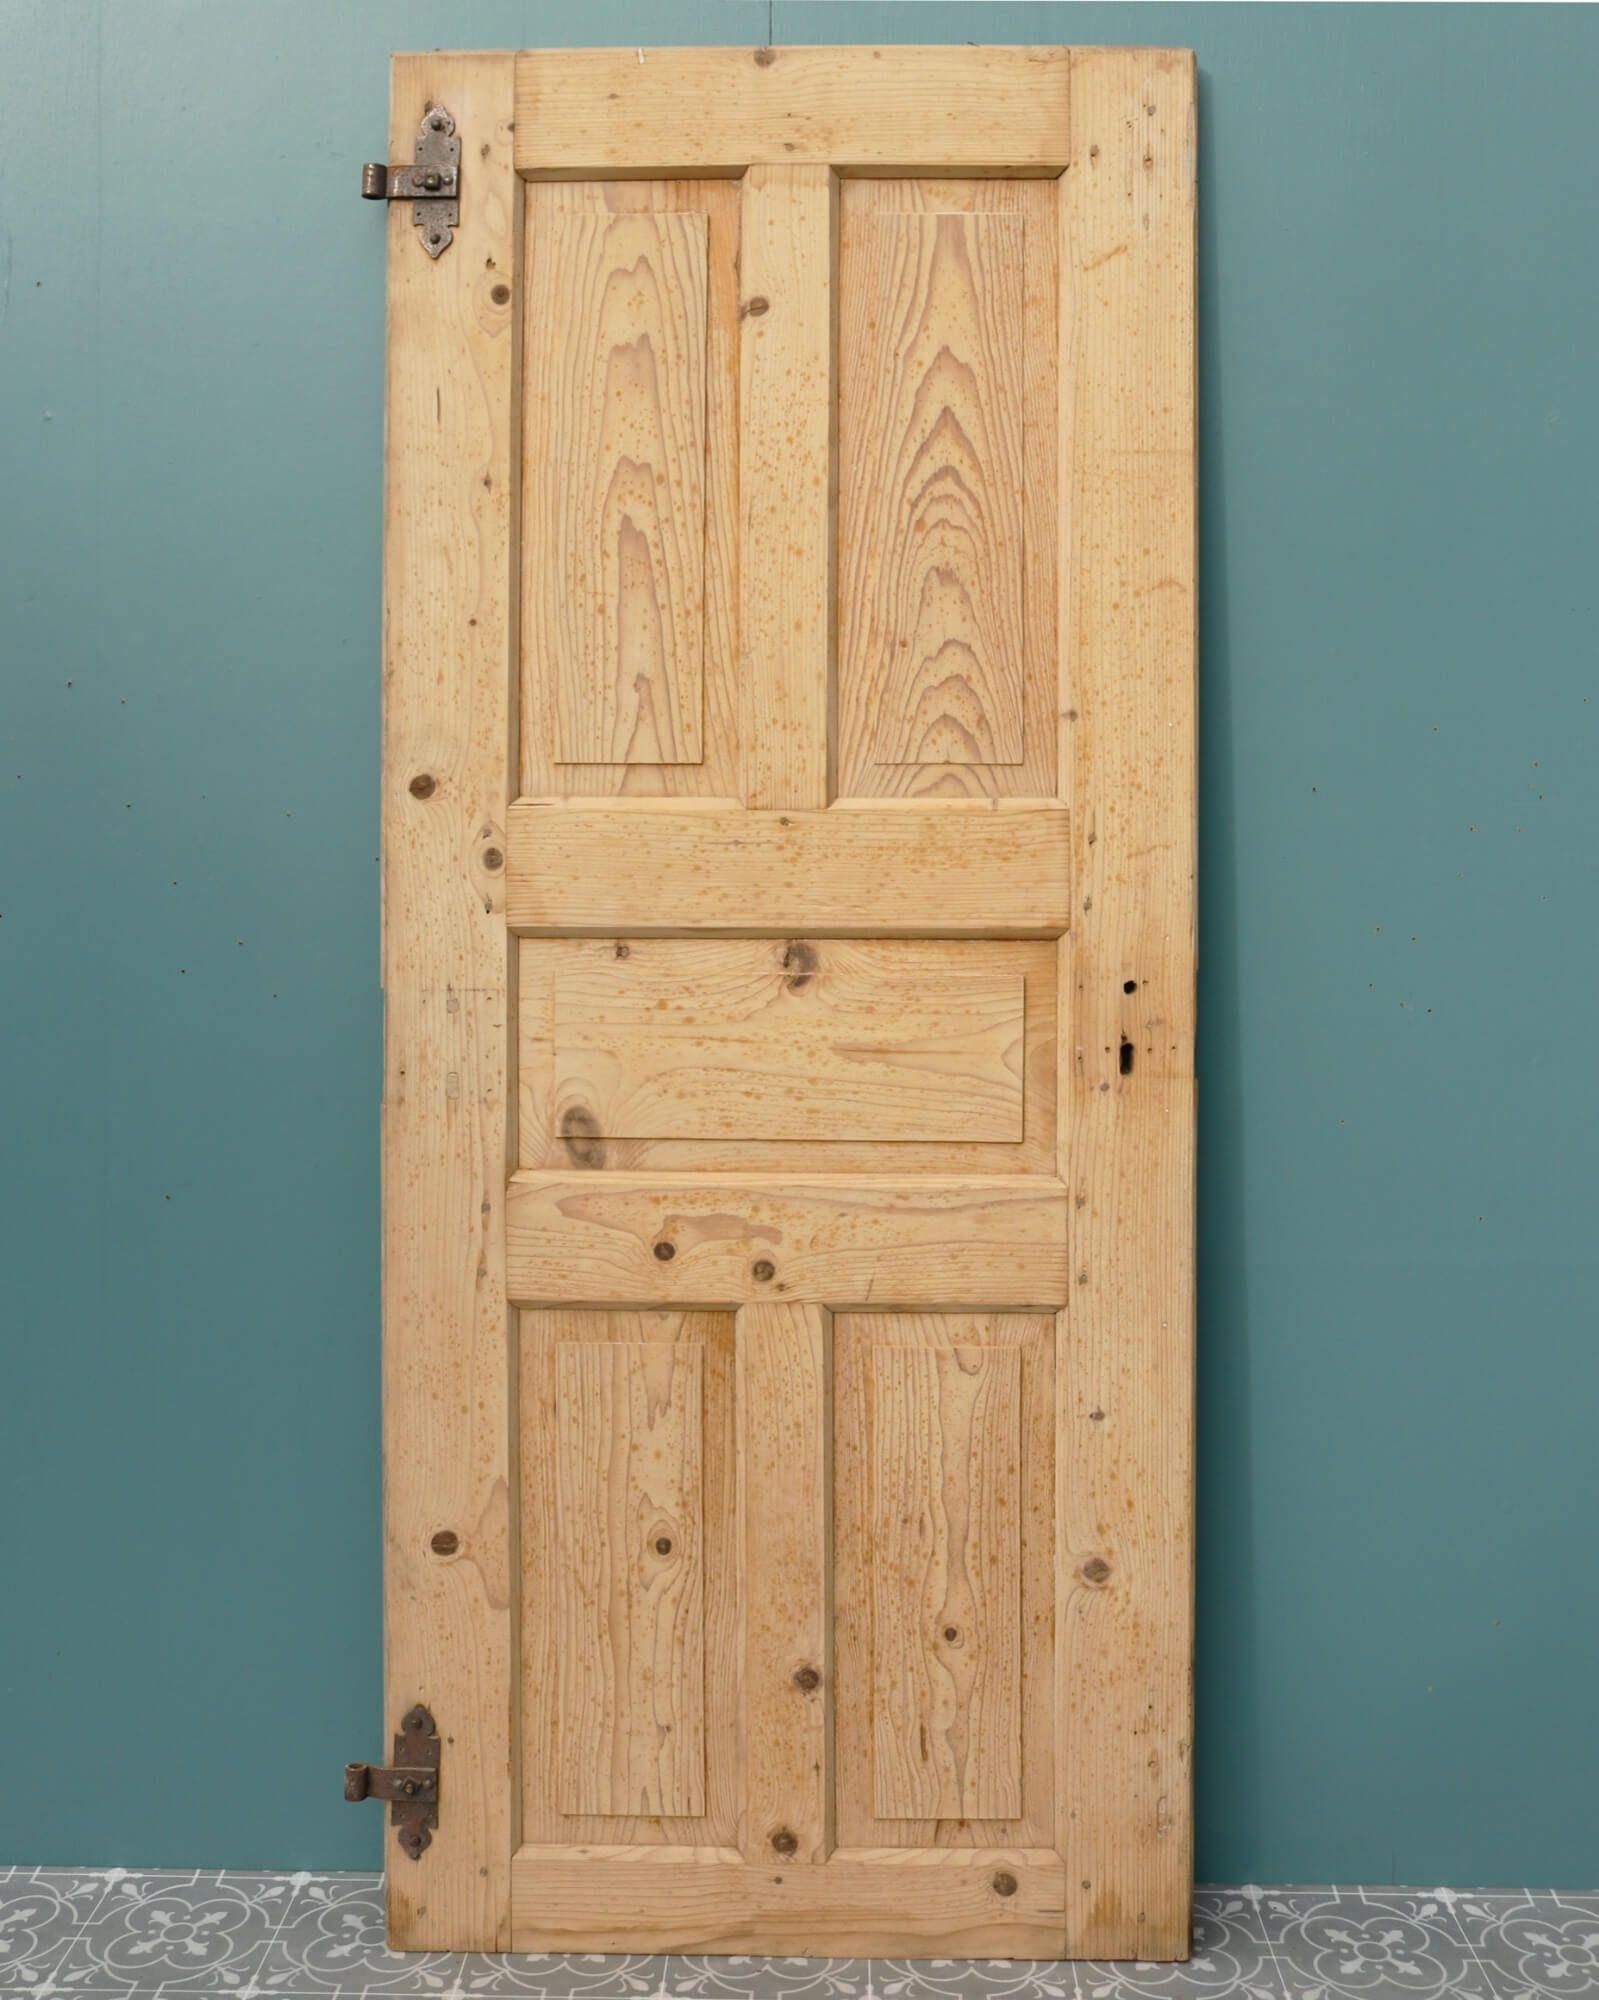 This reclaimed 5-panel internal door is a handsome fitting for a French inspired kitchen or rustic country cottage. Dating from the mid 19th century, this antique door is detailed with 5 raised panels to both the front and the back with original,